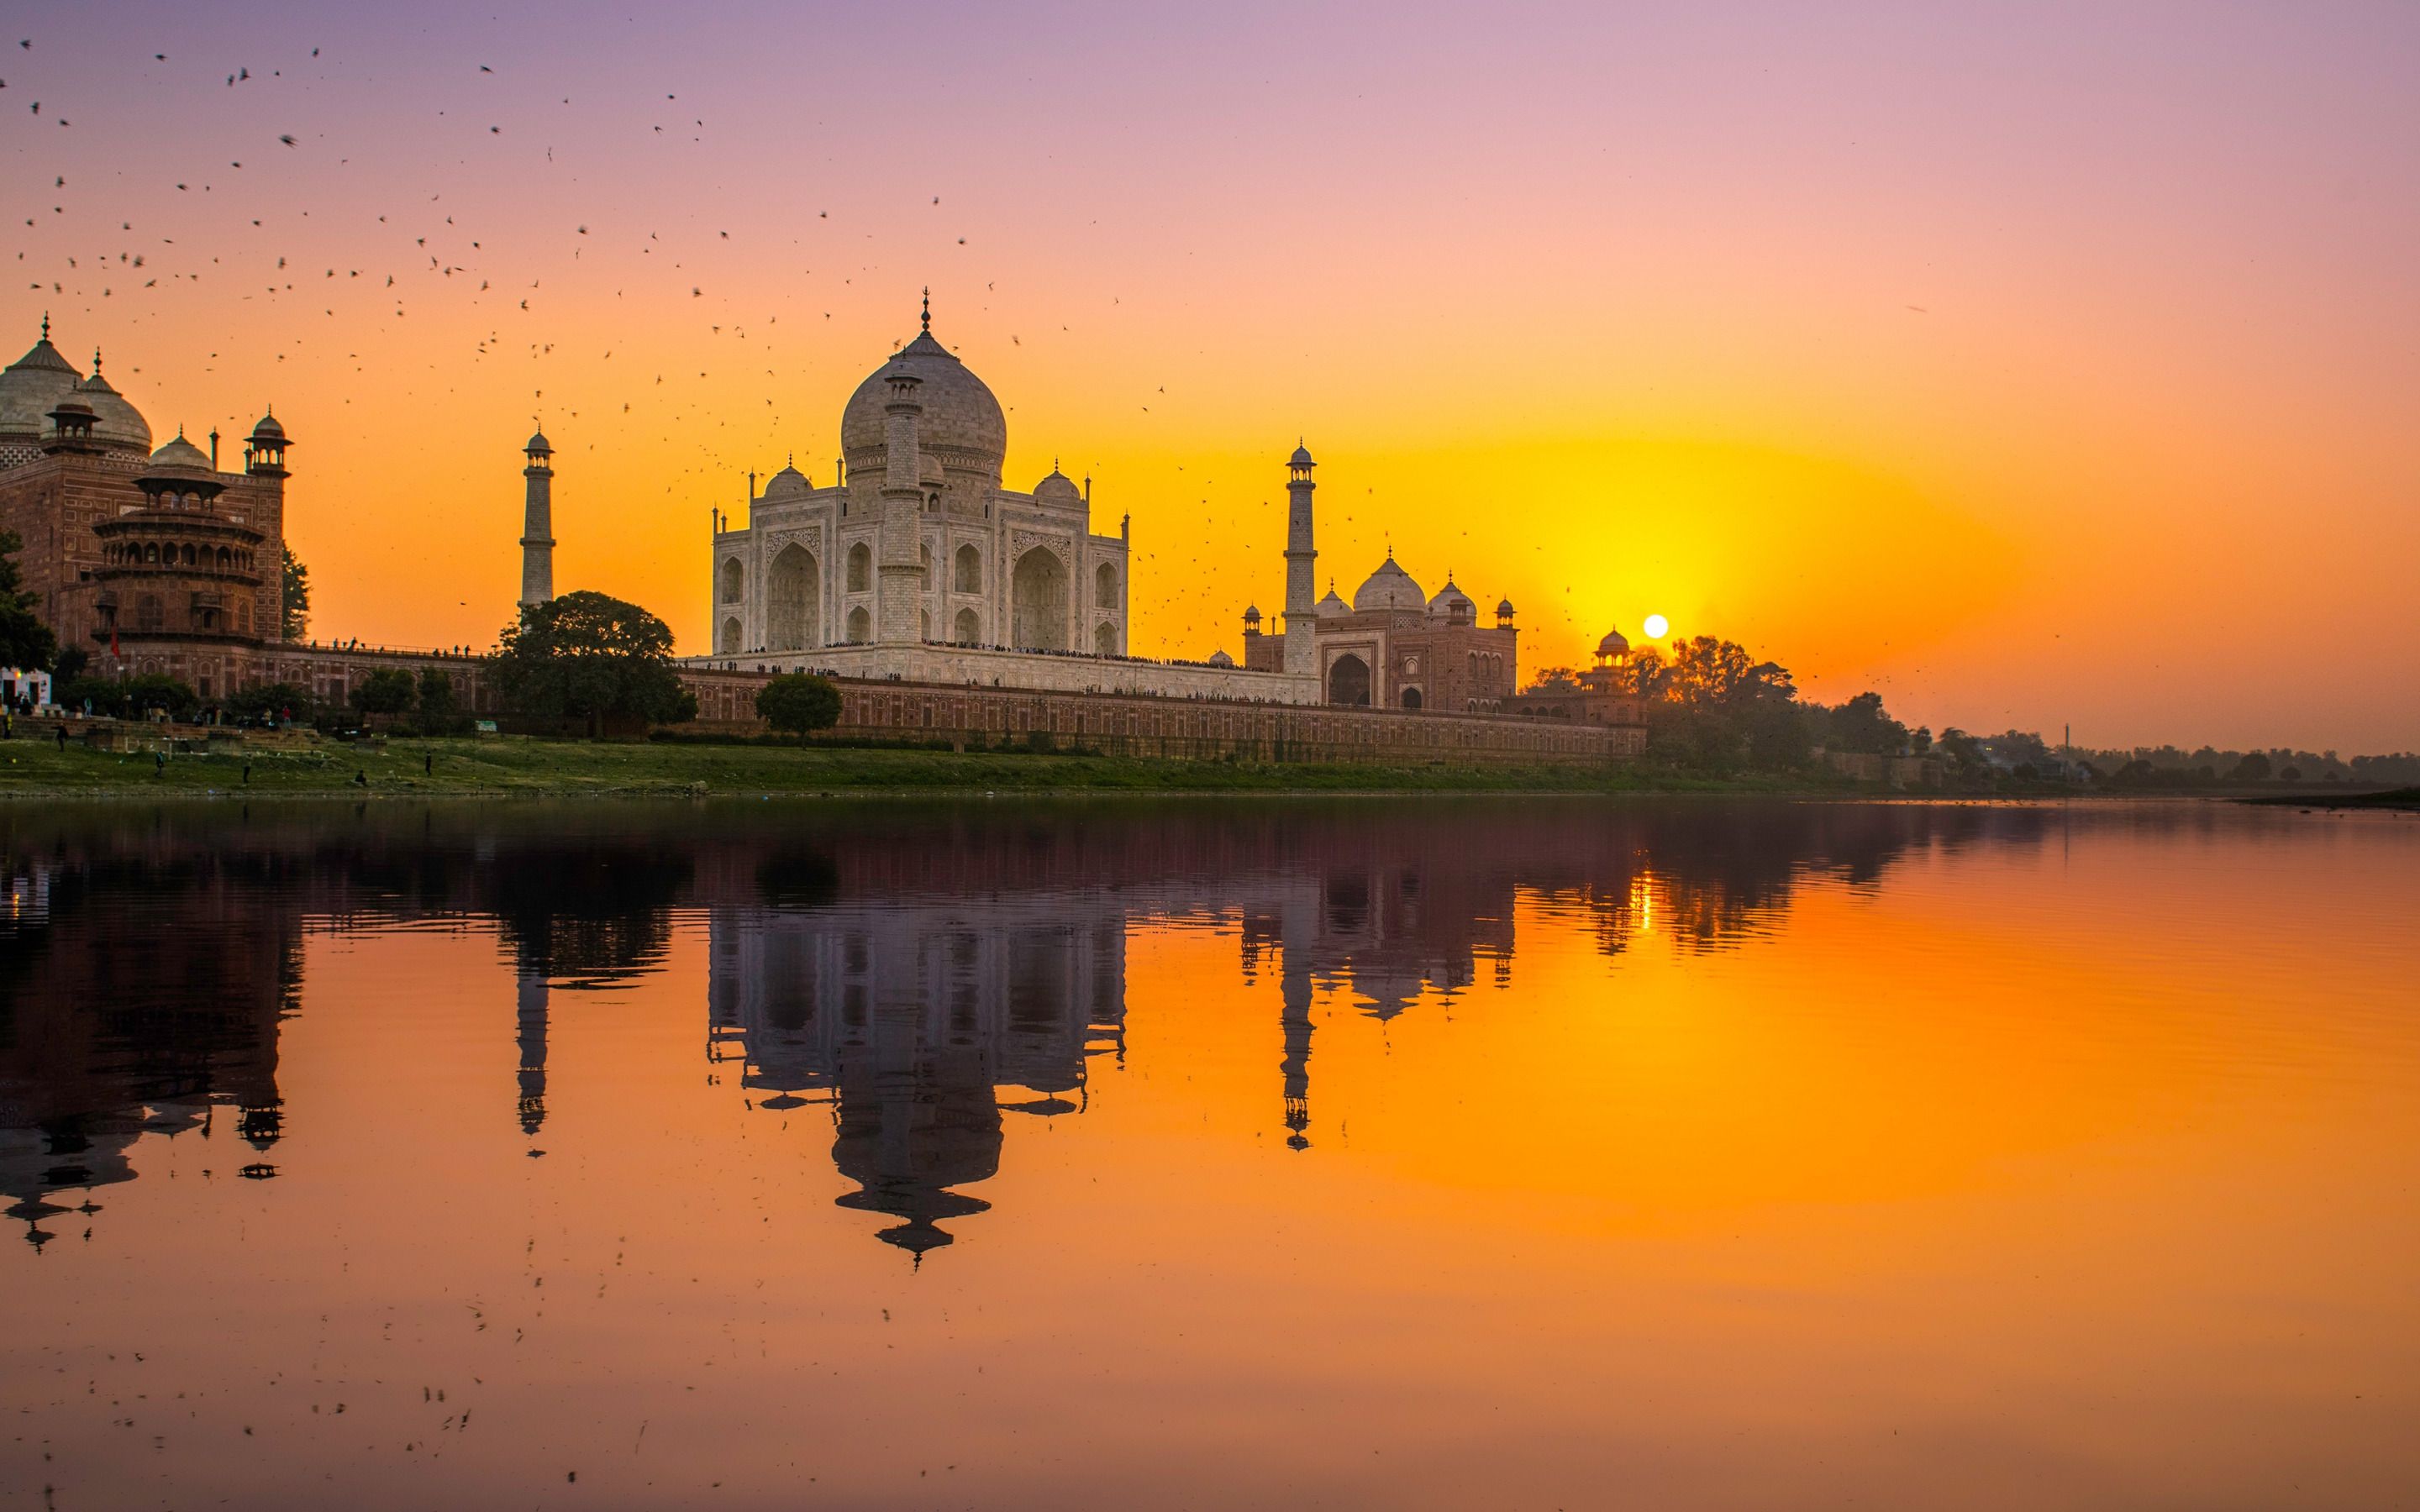 Download wallpaper Taj Mahal, Agra, evening, sunset, landmark, Uttar Pradesh, India, Crown of the Palace, Mughal architecture for desktop with resolution 2880x1800. High Quality HD picture wallpaper